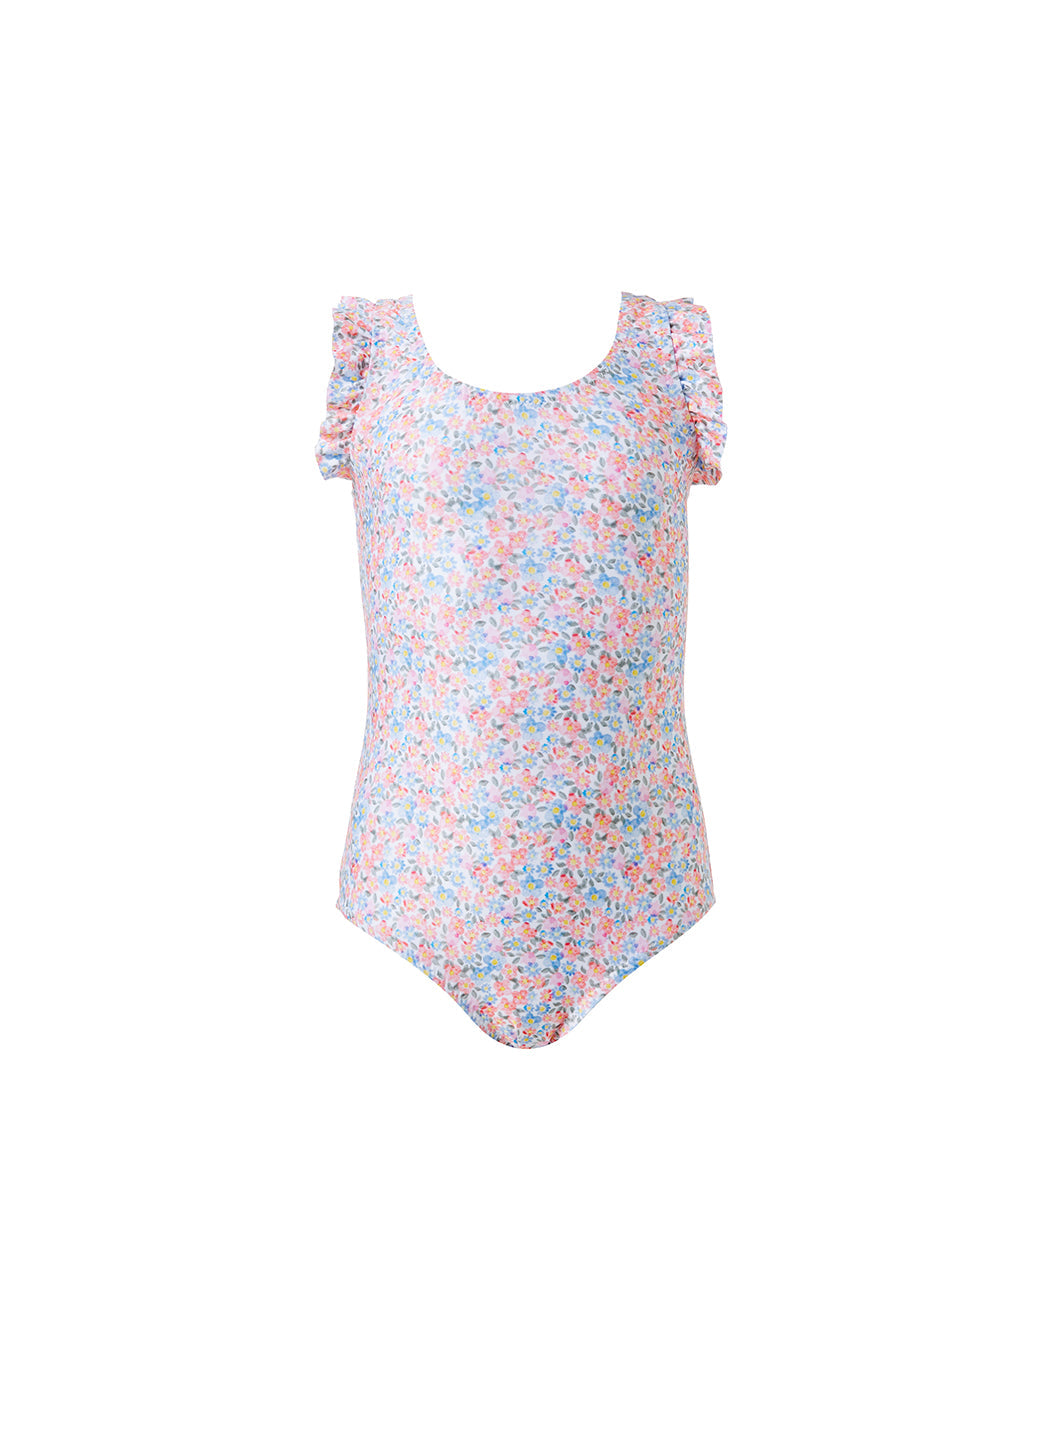 Girls Milly Posies Swimsuit